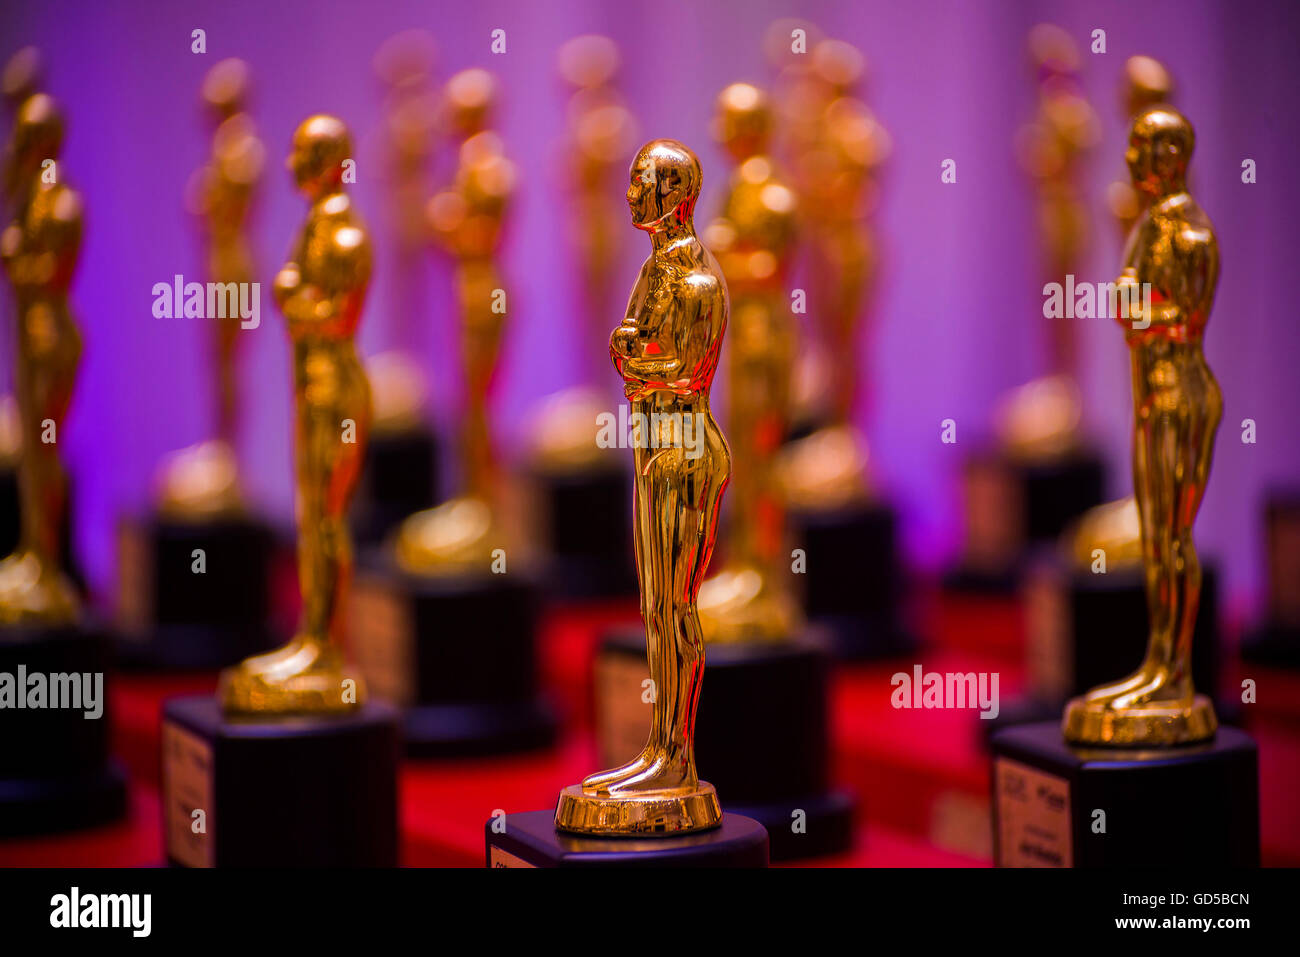 Group of Shiny Golden Prize Statues Stock Photo